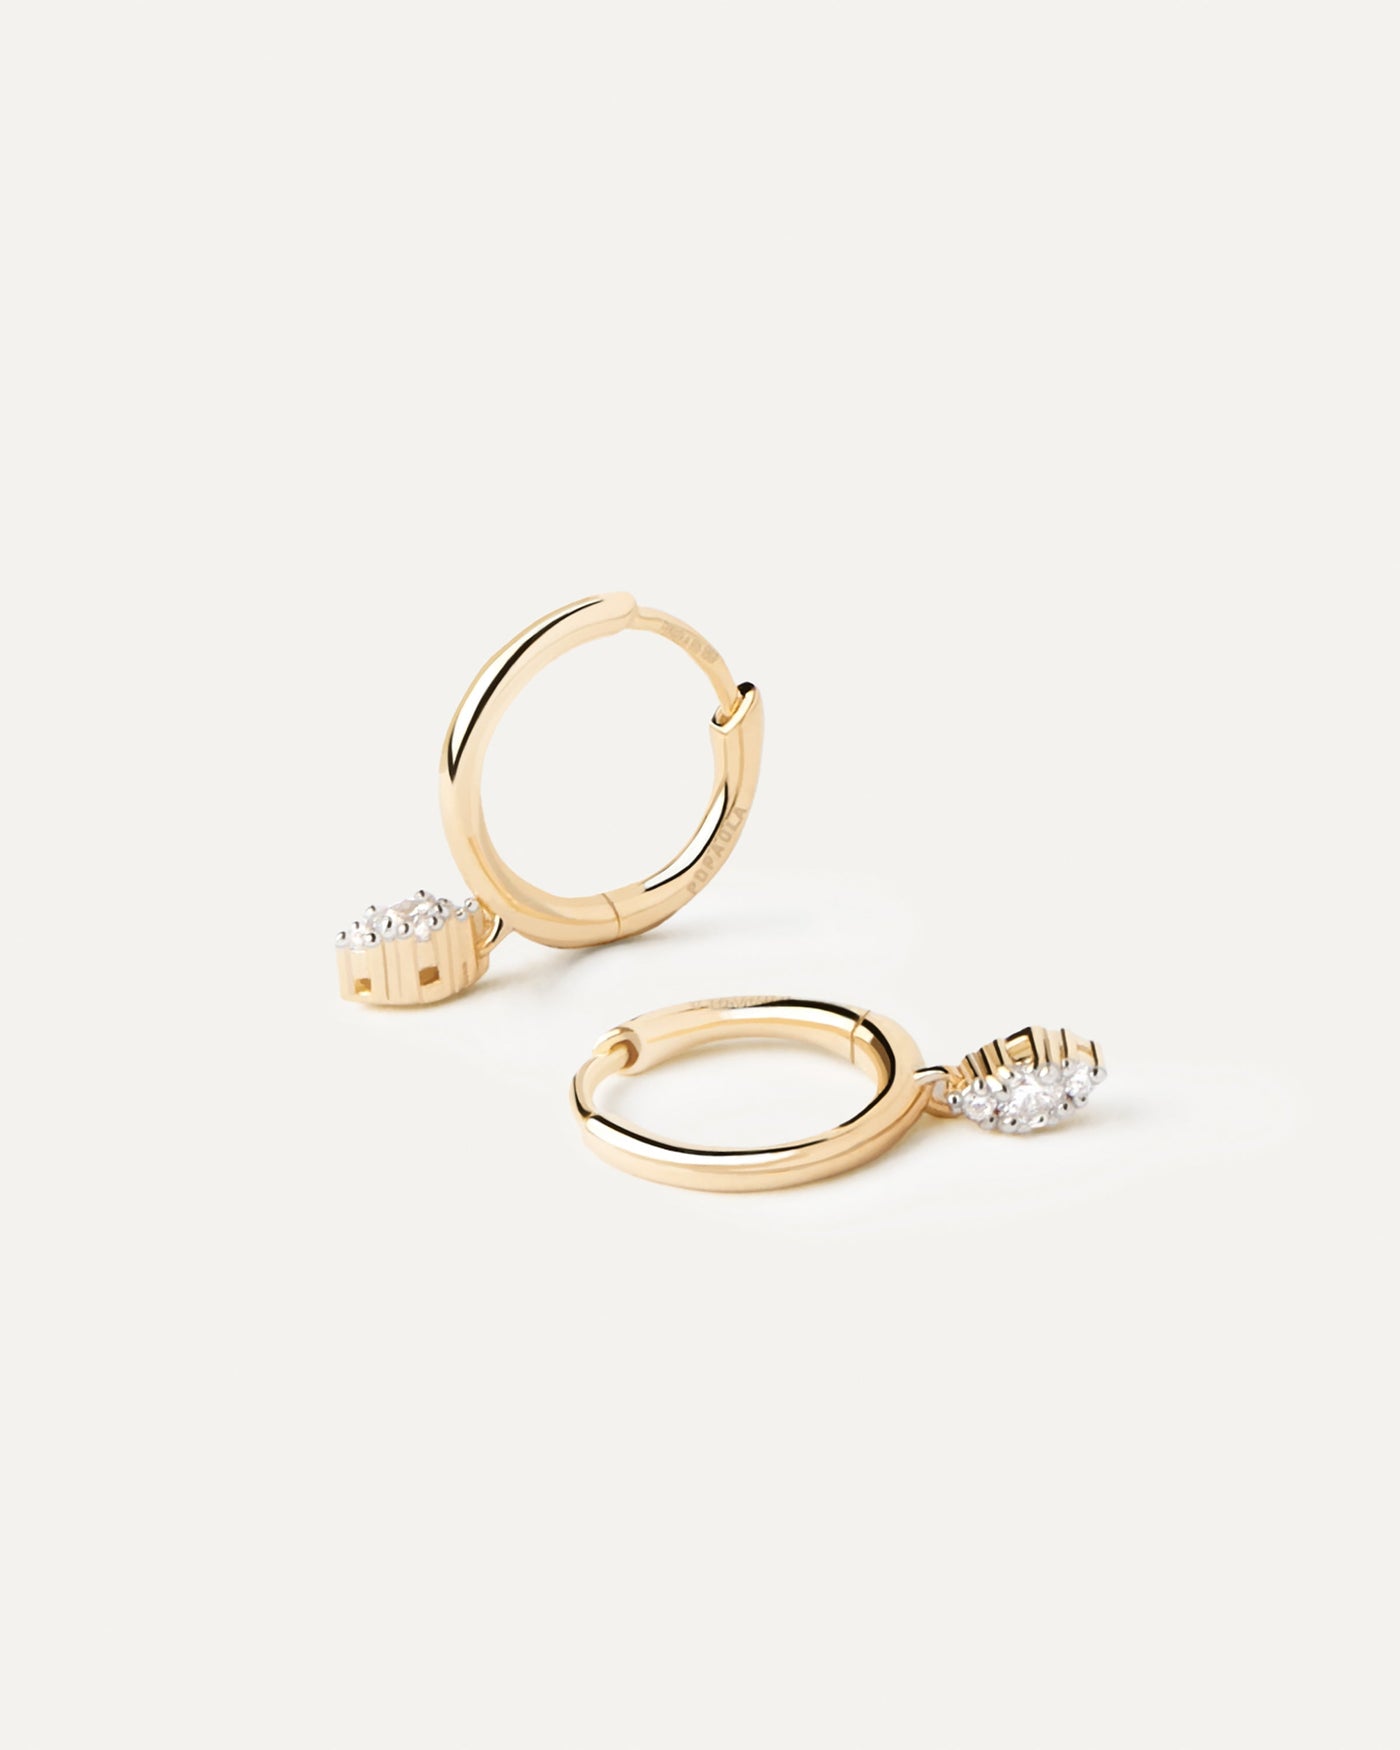 2023 Selection | Diamonds And Gold Emi Hoops. Yellow gold hoops with small diamonds pendant of 0.08 carats each earring. Get the latest arrival from PDPAOLA. Place your order safely and get this Best Seller. Free Shipping.